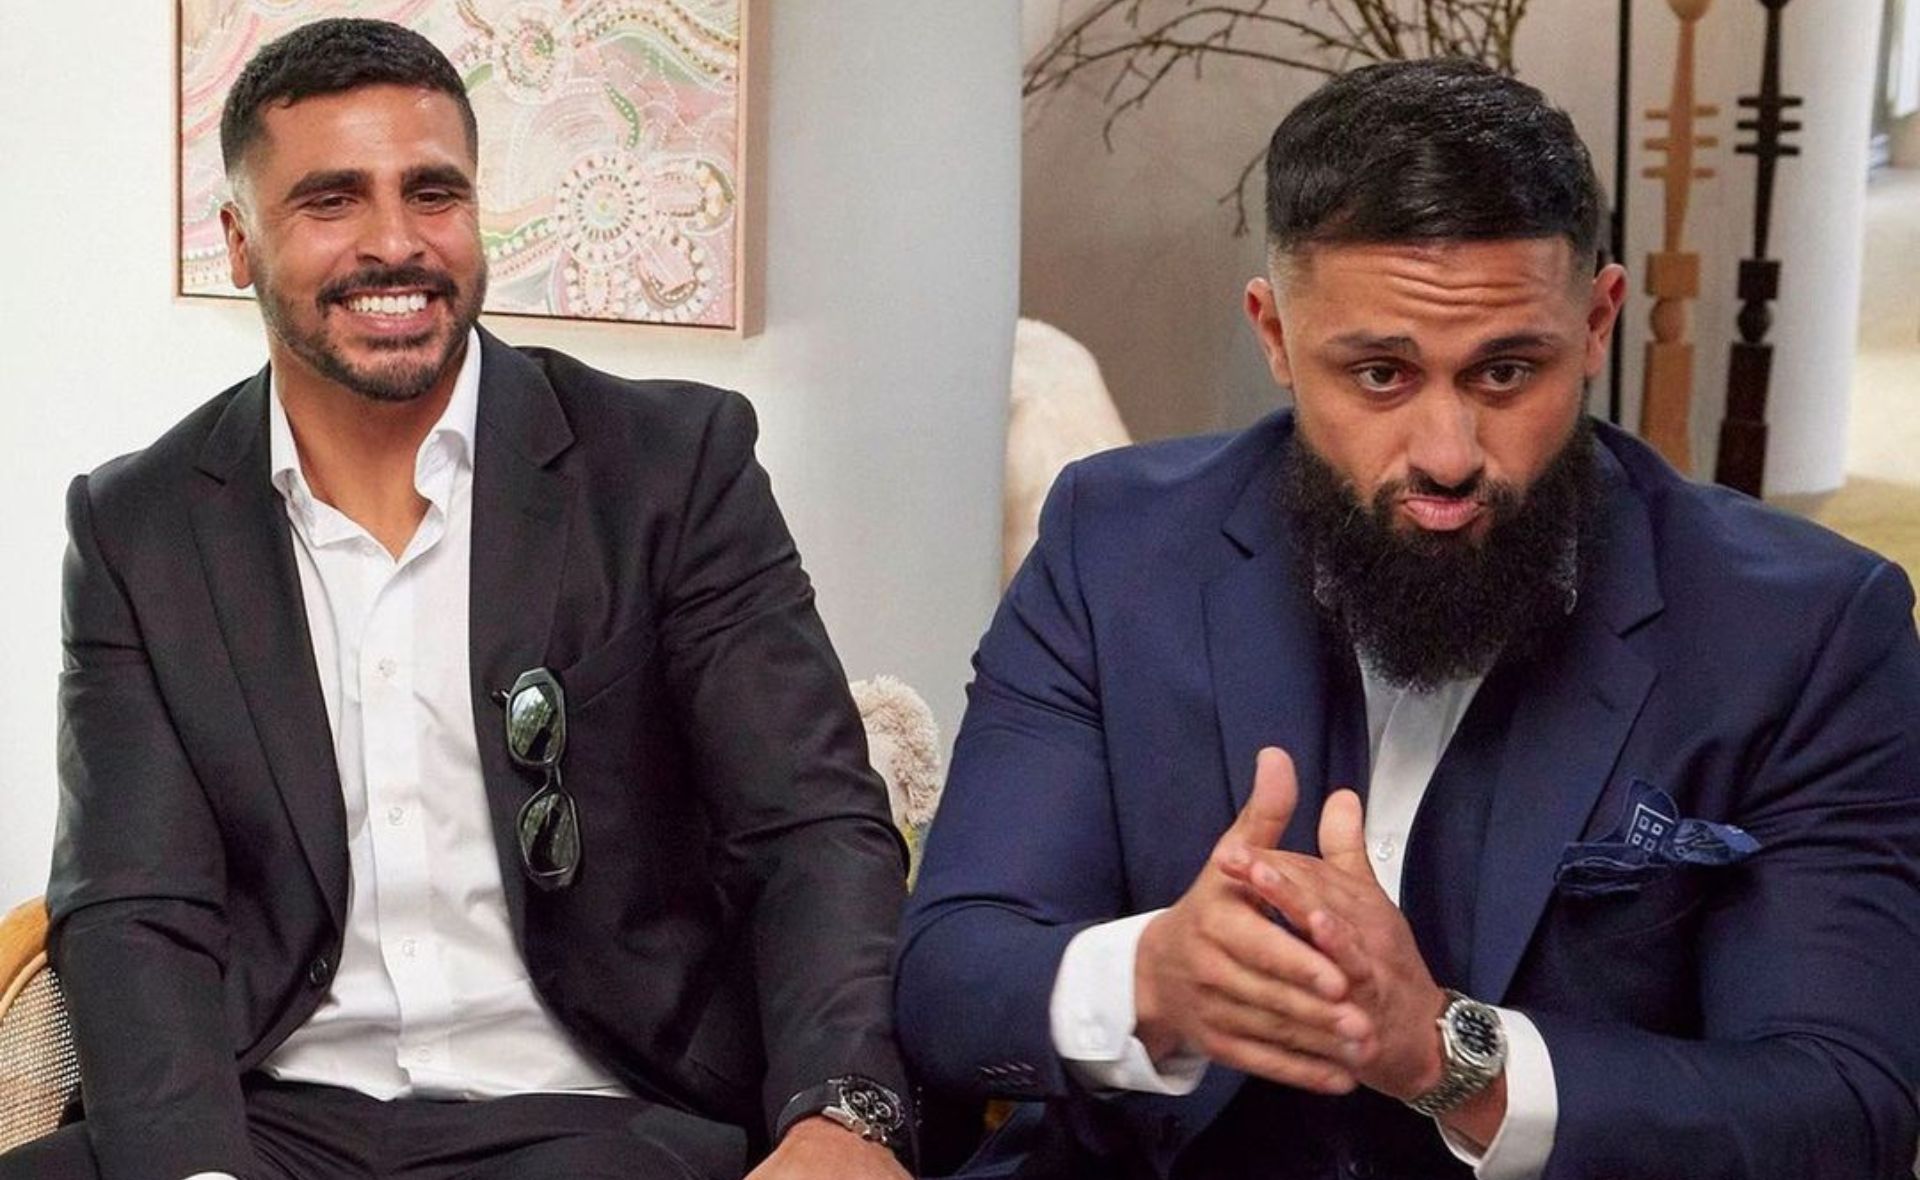 EXCLUSIVE: “It felt like we were targeted”: The Block’s Omar and Oz address backlash following their history-making victory